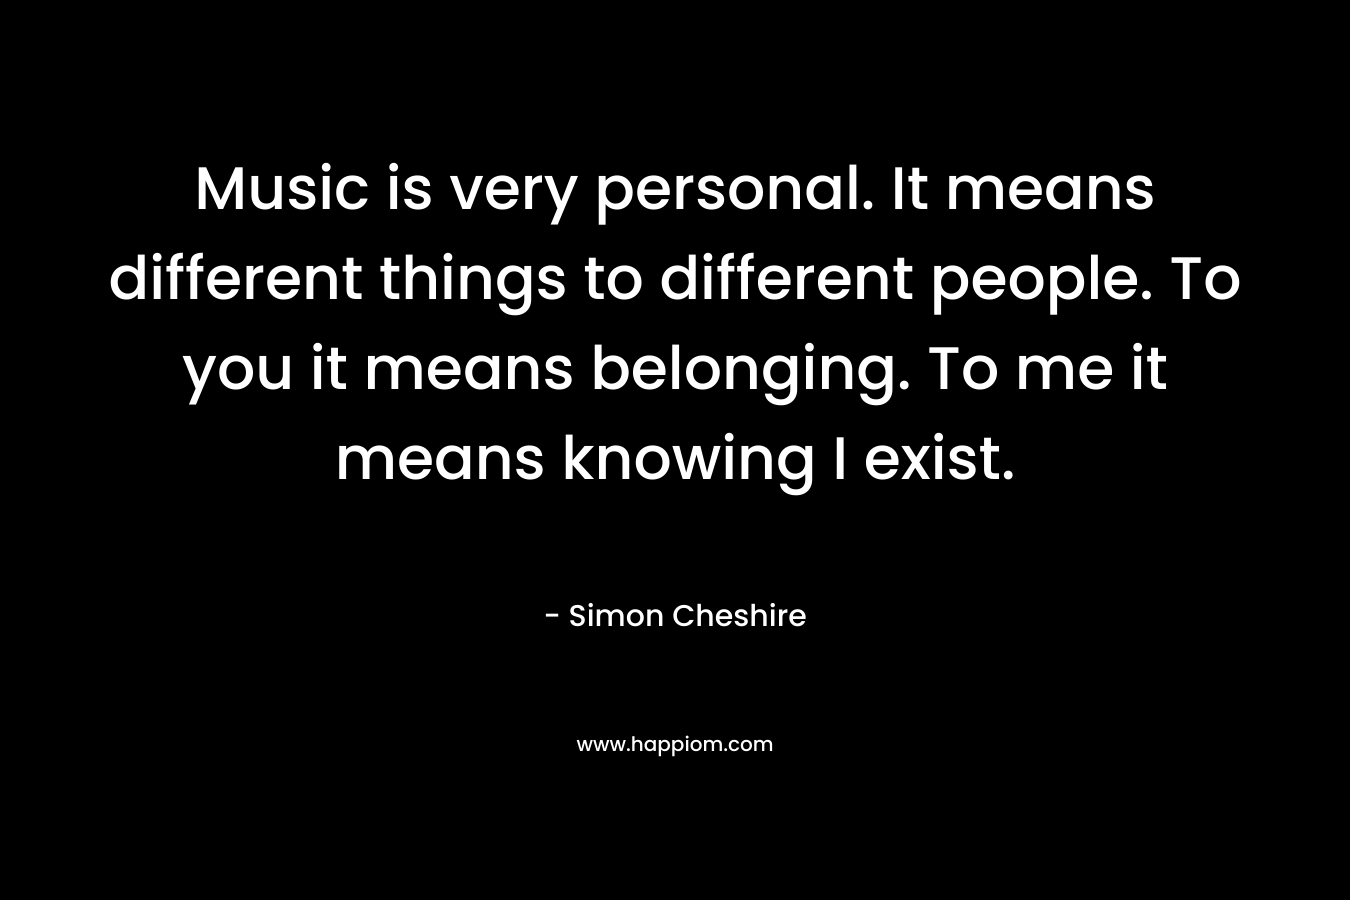 Music is very personal. It means different things to different people. To you it means belonging. To me it means knowing I exist.